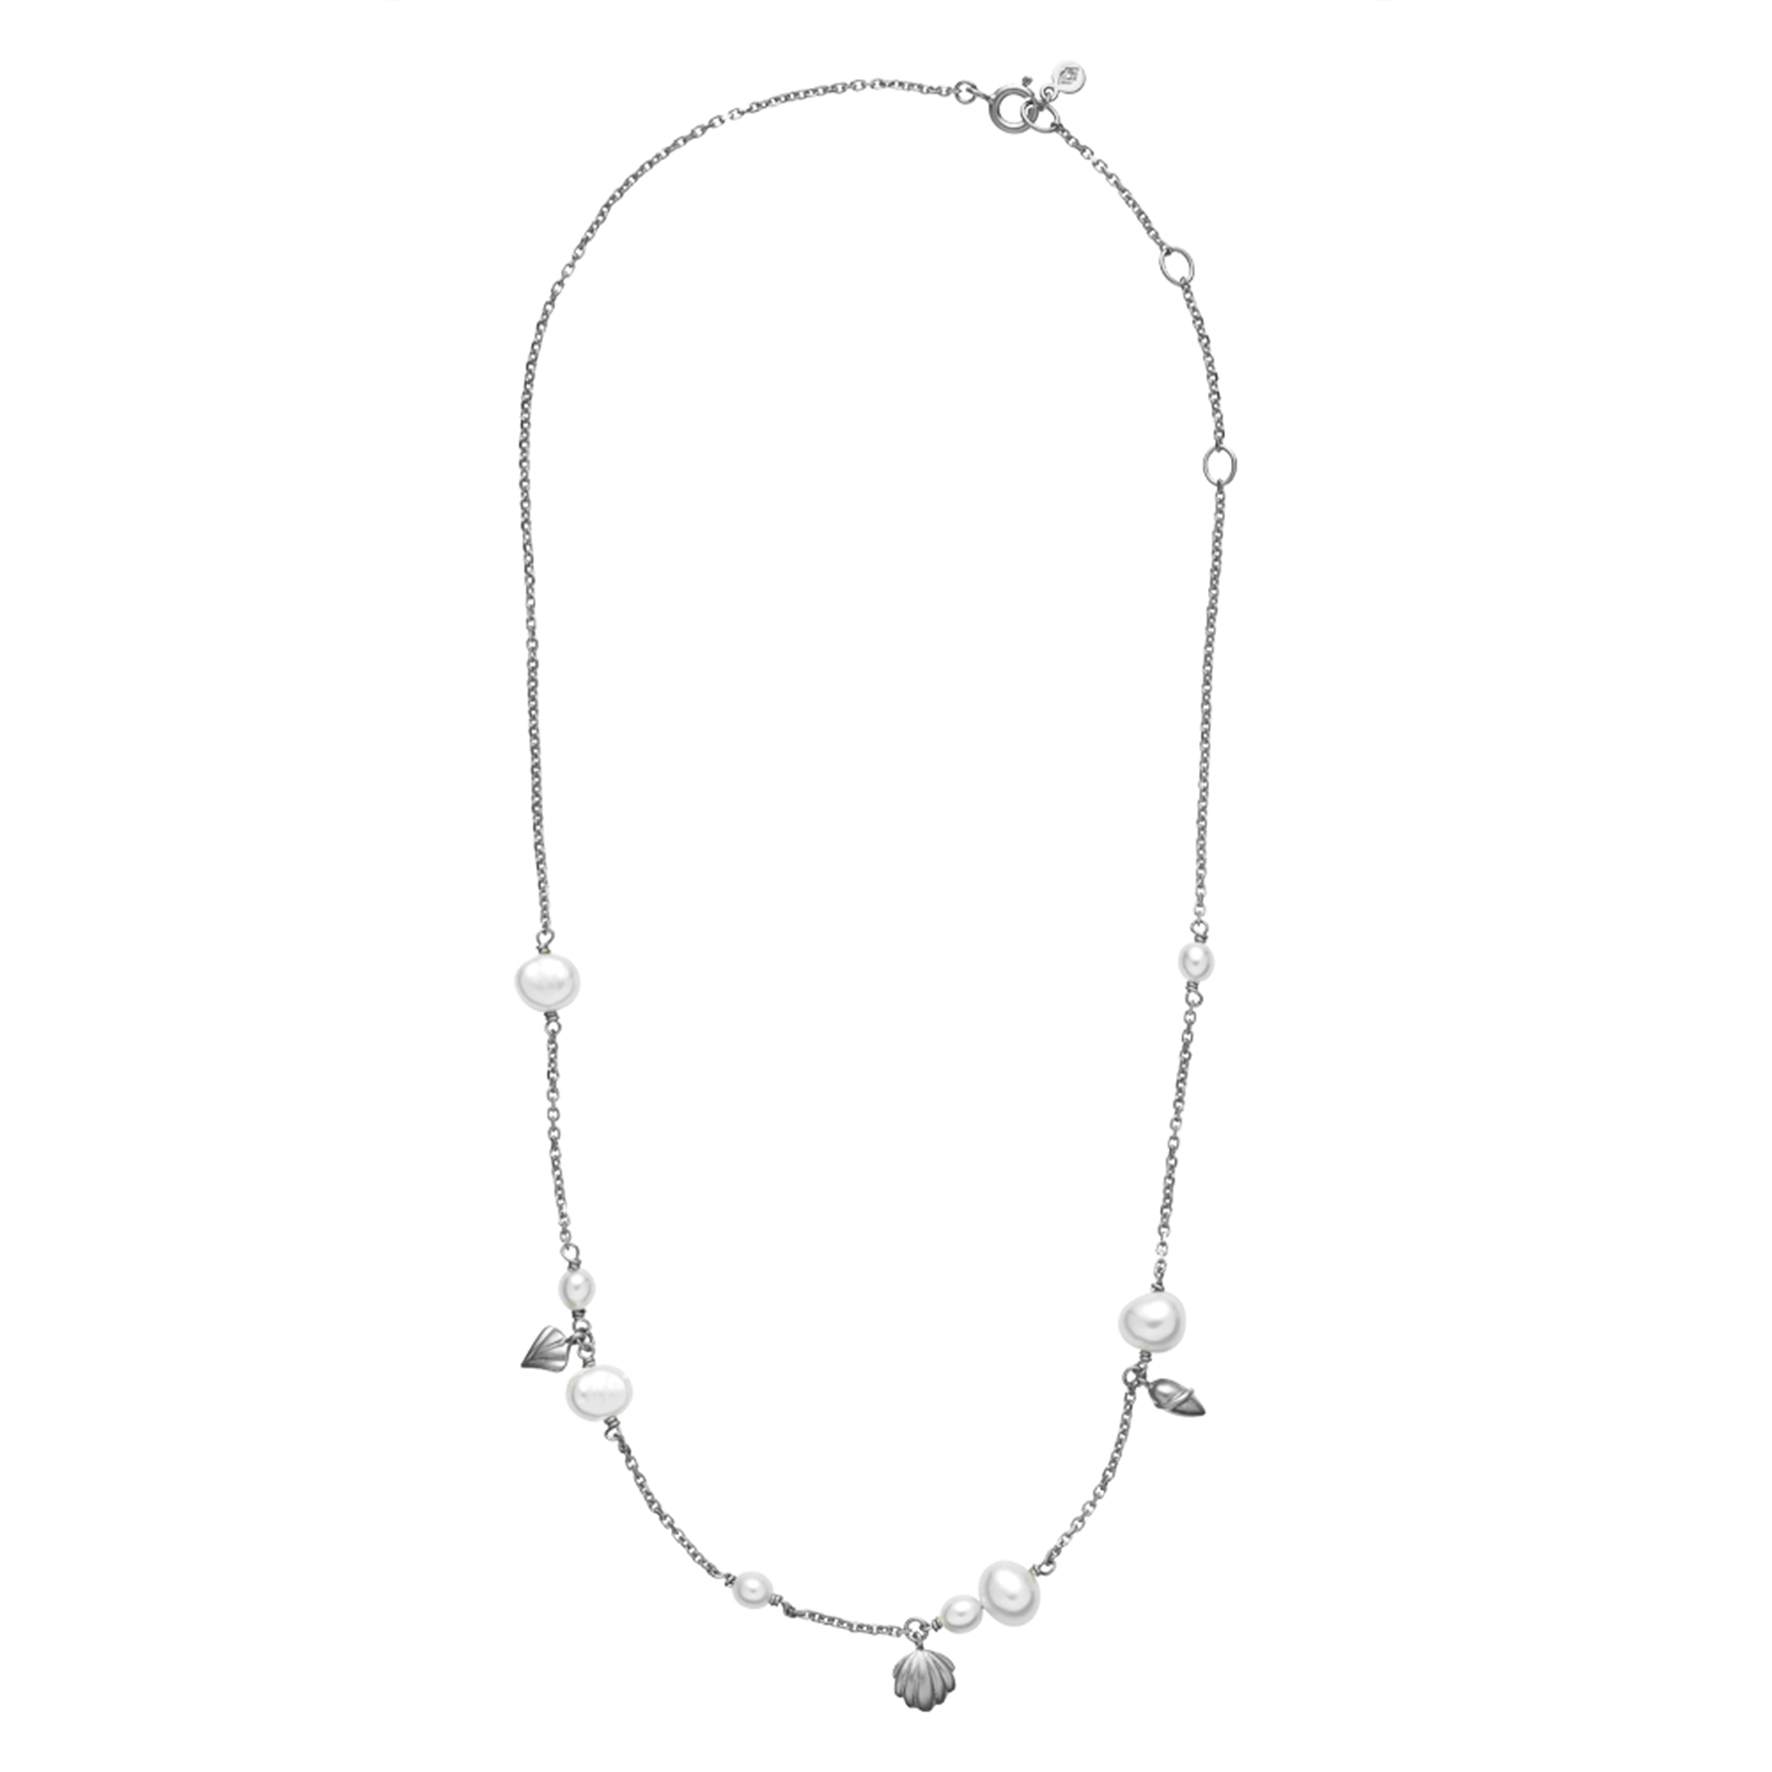 Isabella White Necklace from Izabel Camille in Silver Sterling 925